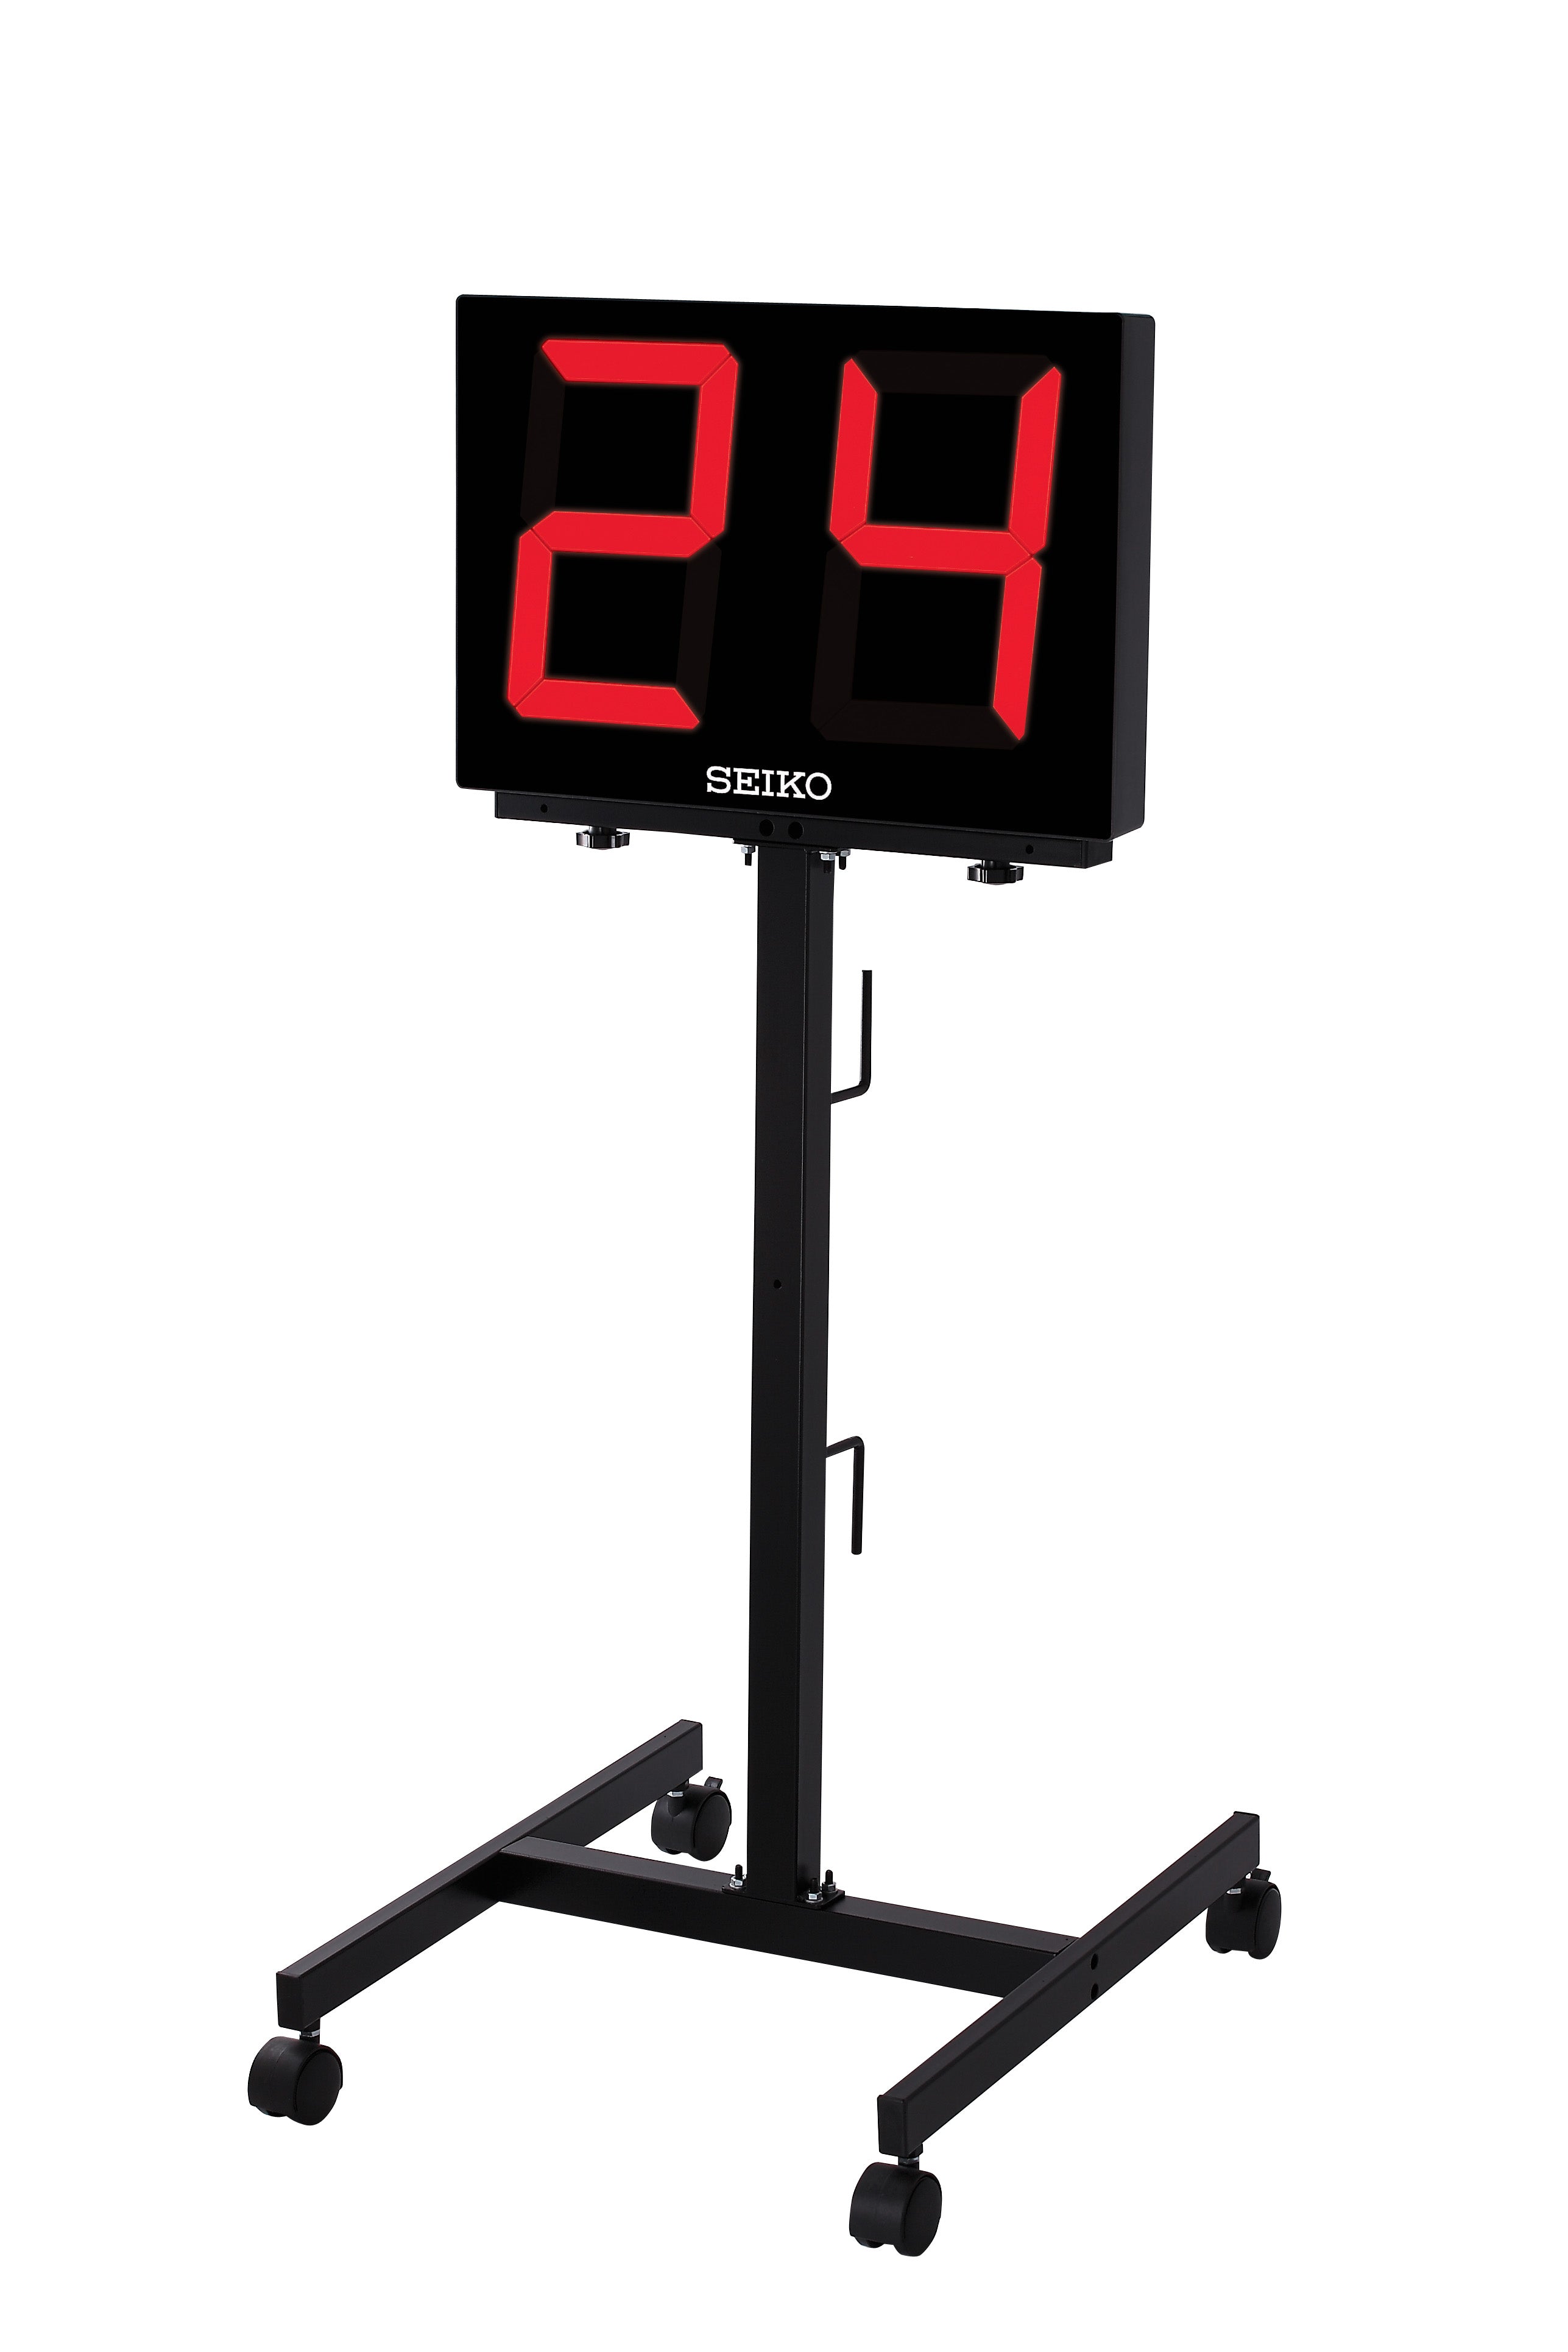 SEIKO KT-011 - Caster Stand | SEIKO & Ultrak Timing from CEI